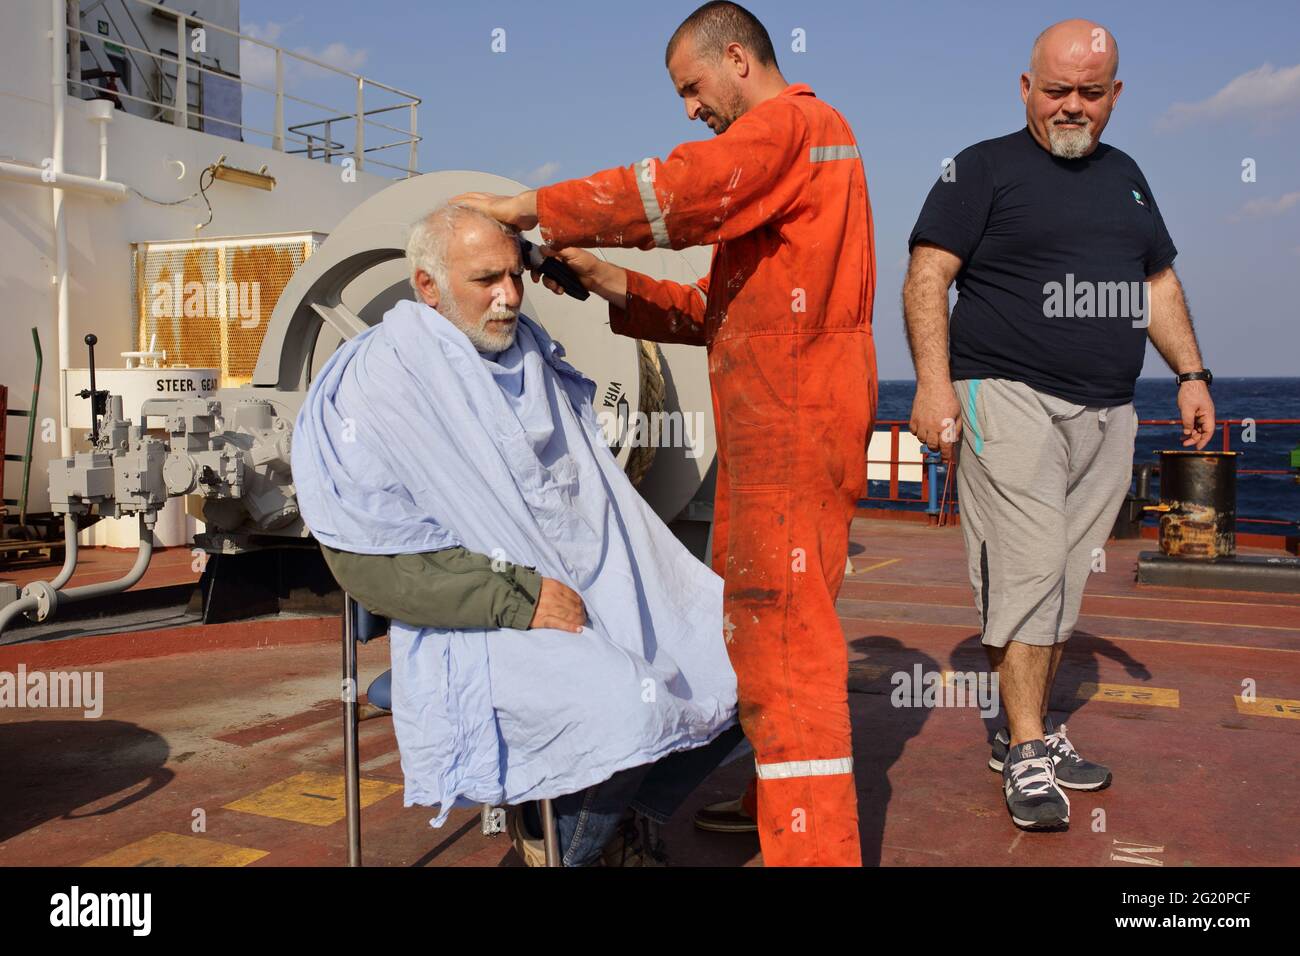 Able seaman is cutting masters hair. Sunday is the holiday even vessel is sailing in the middle of the ocean. Only, the afterpart barbershop is open but the barber is an able seaman. Stock Photo